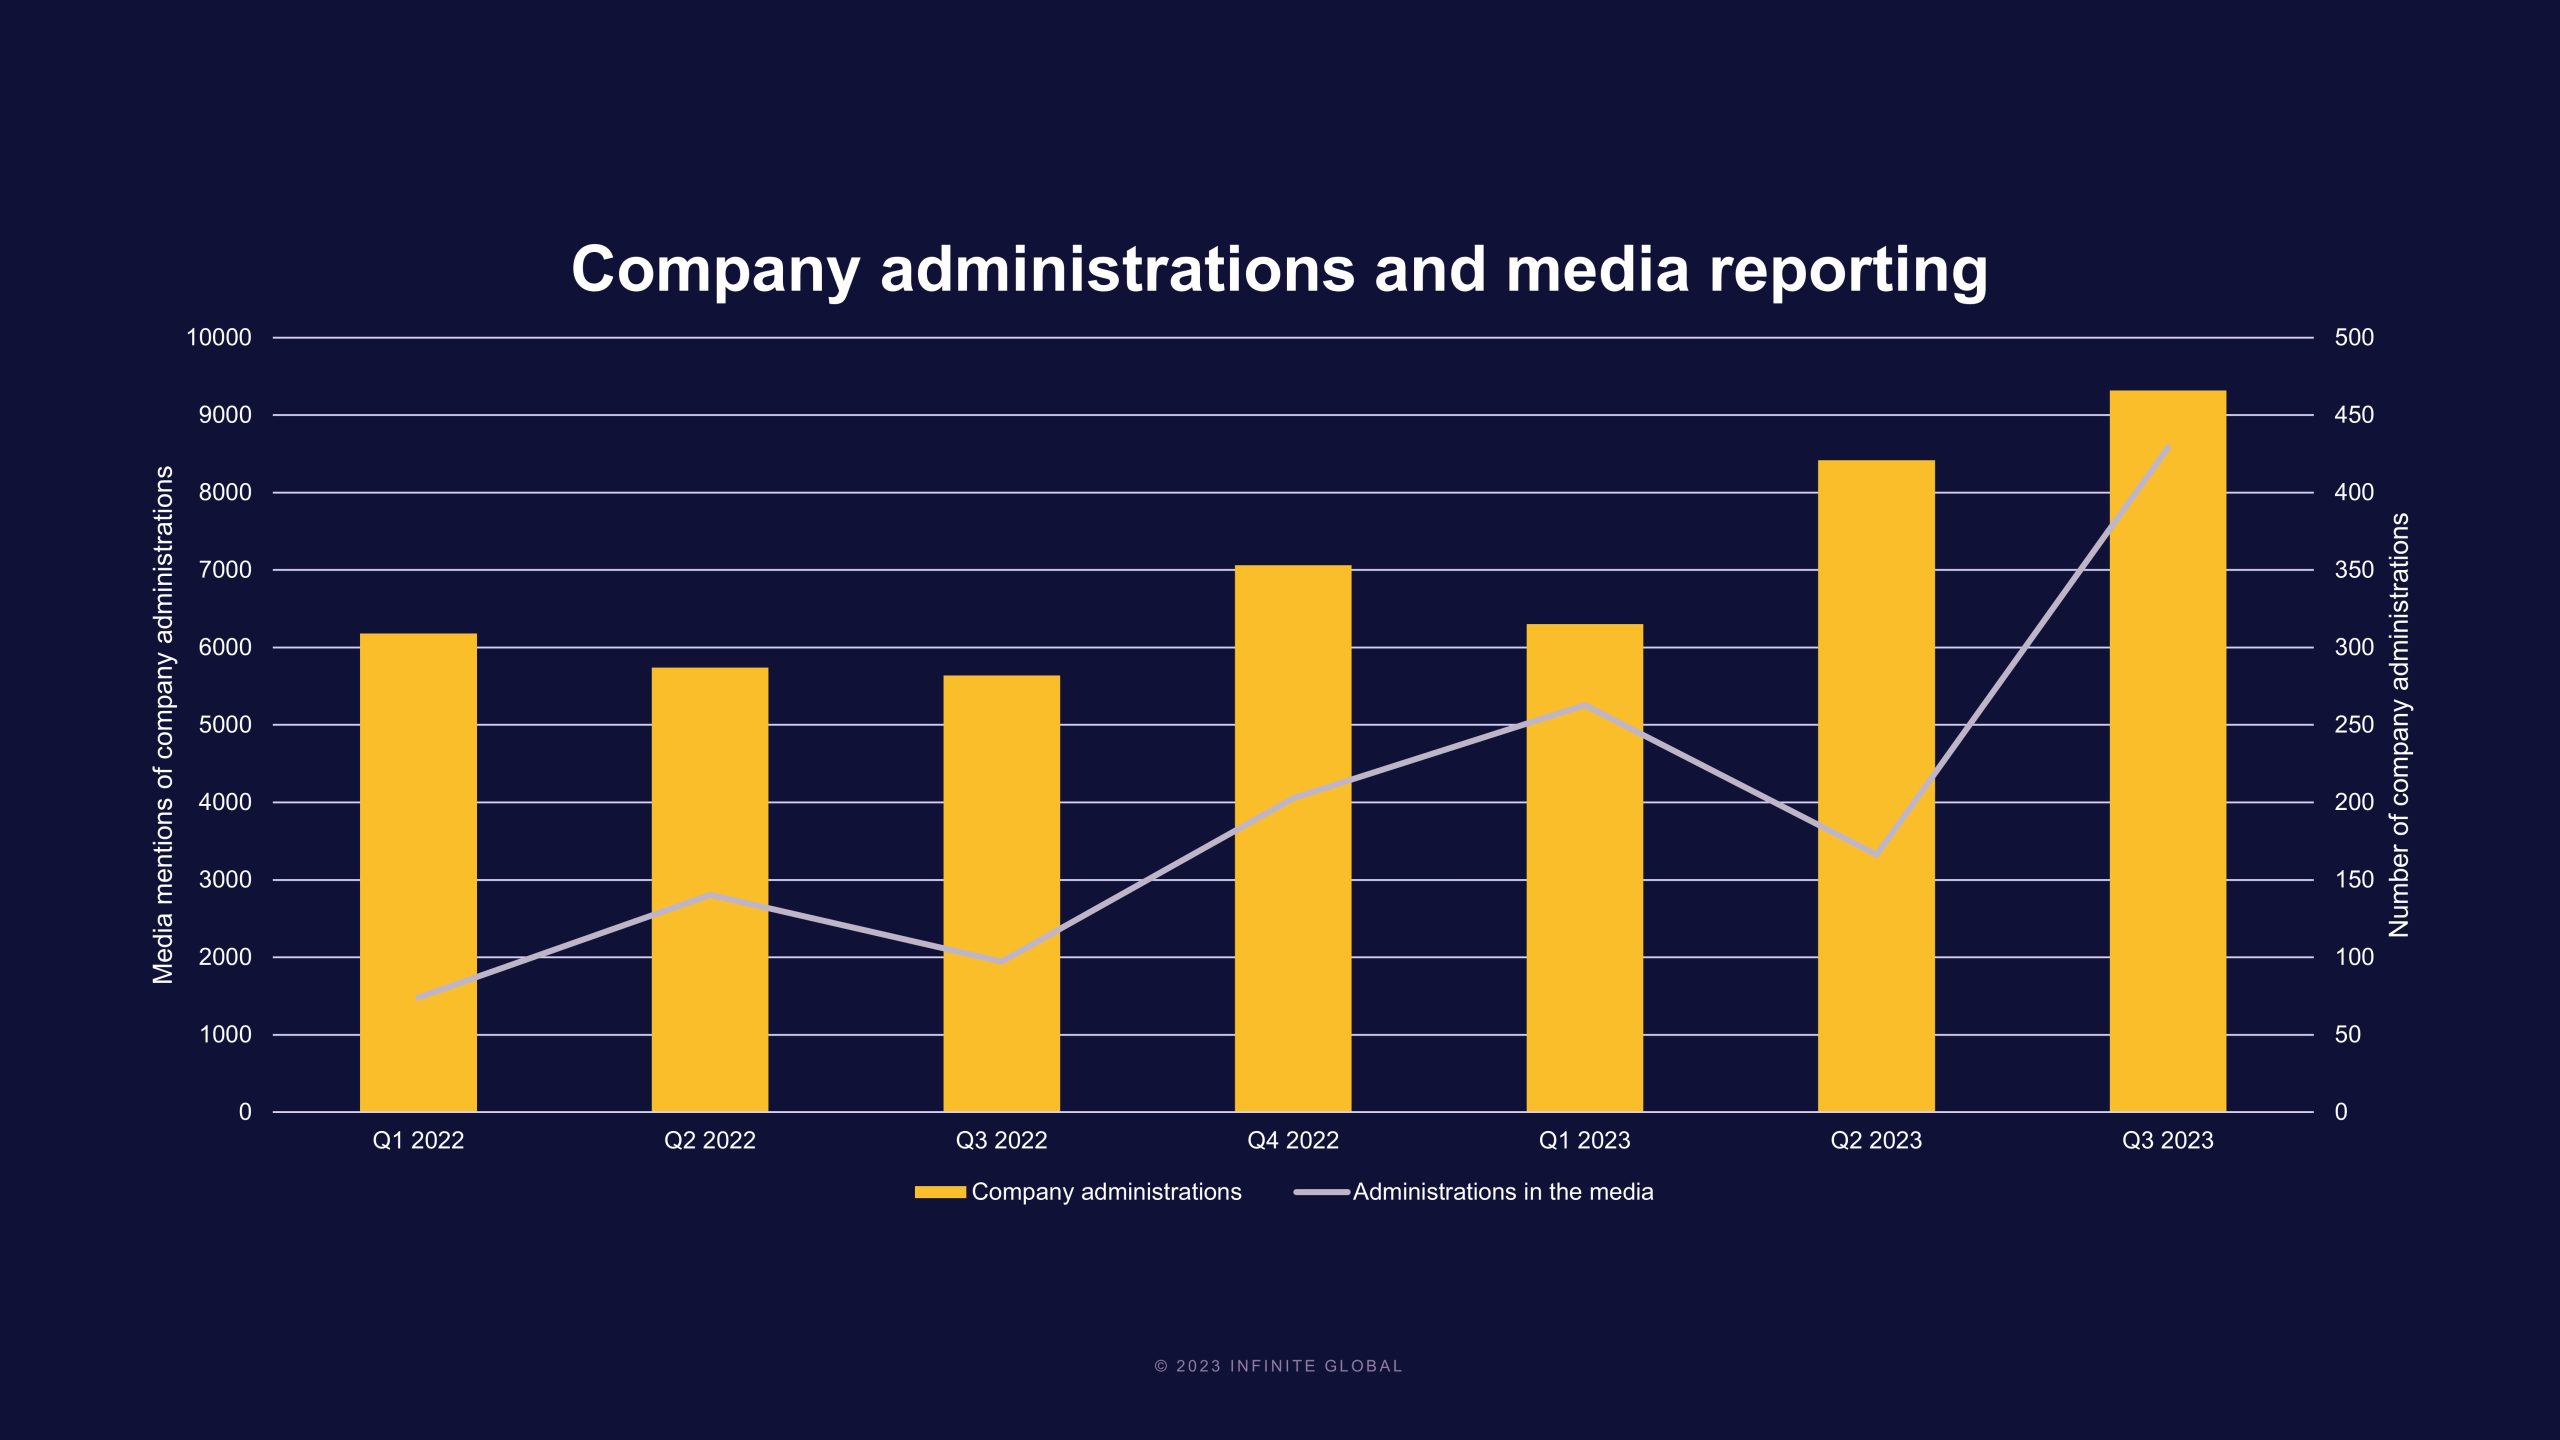 Company administration and media reporting